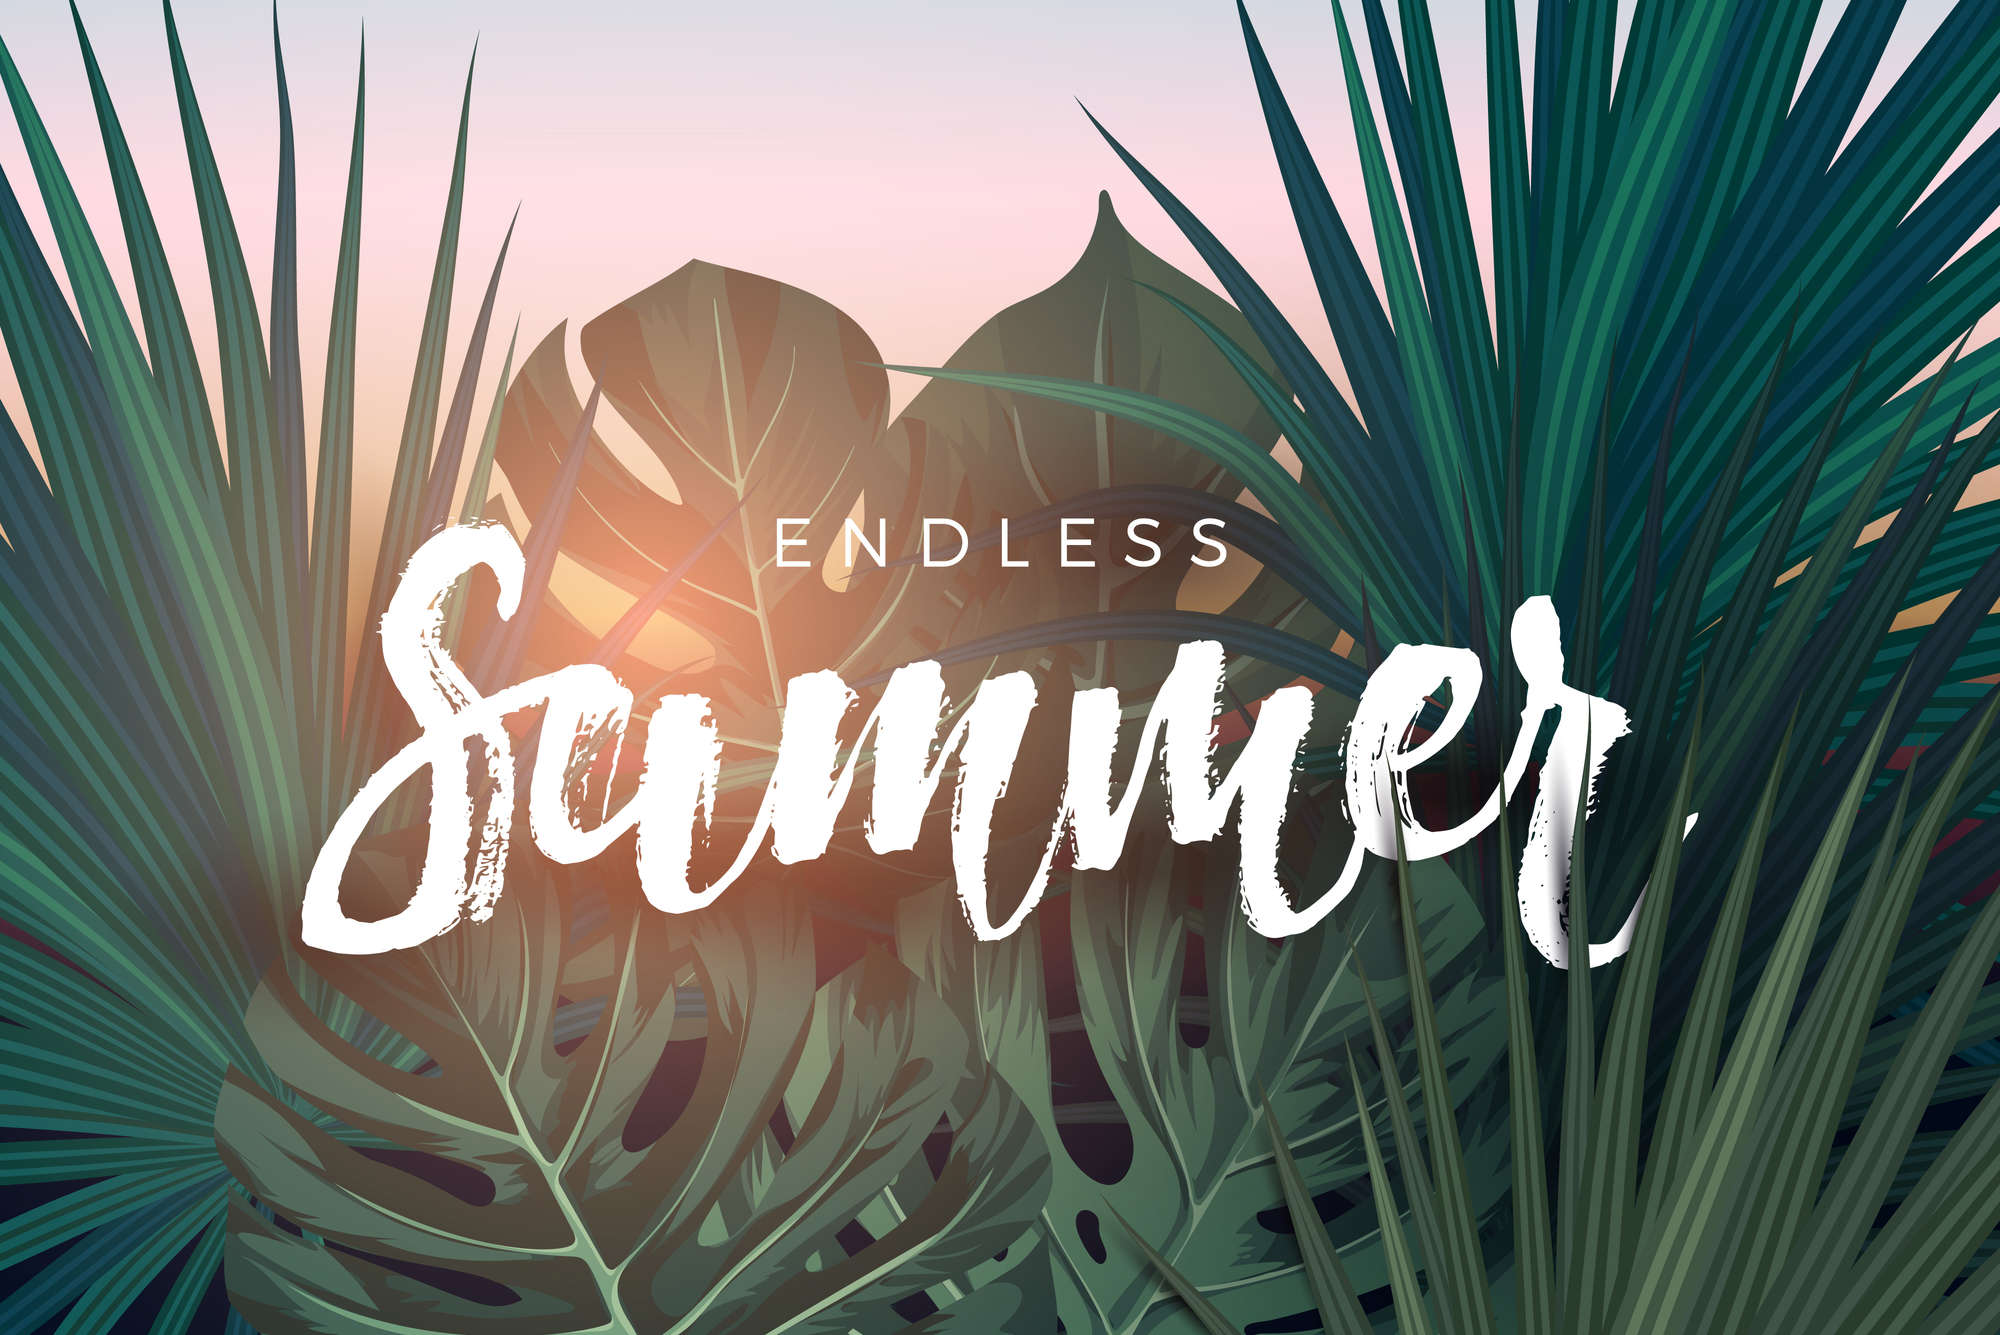             Graphic wall mural "Endless Summer" lettering on matt smooth non-woven
        